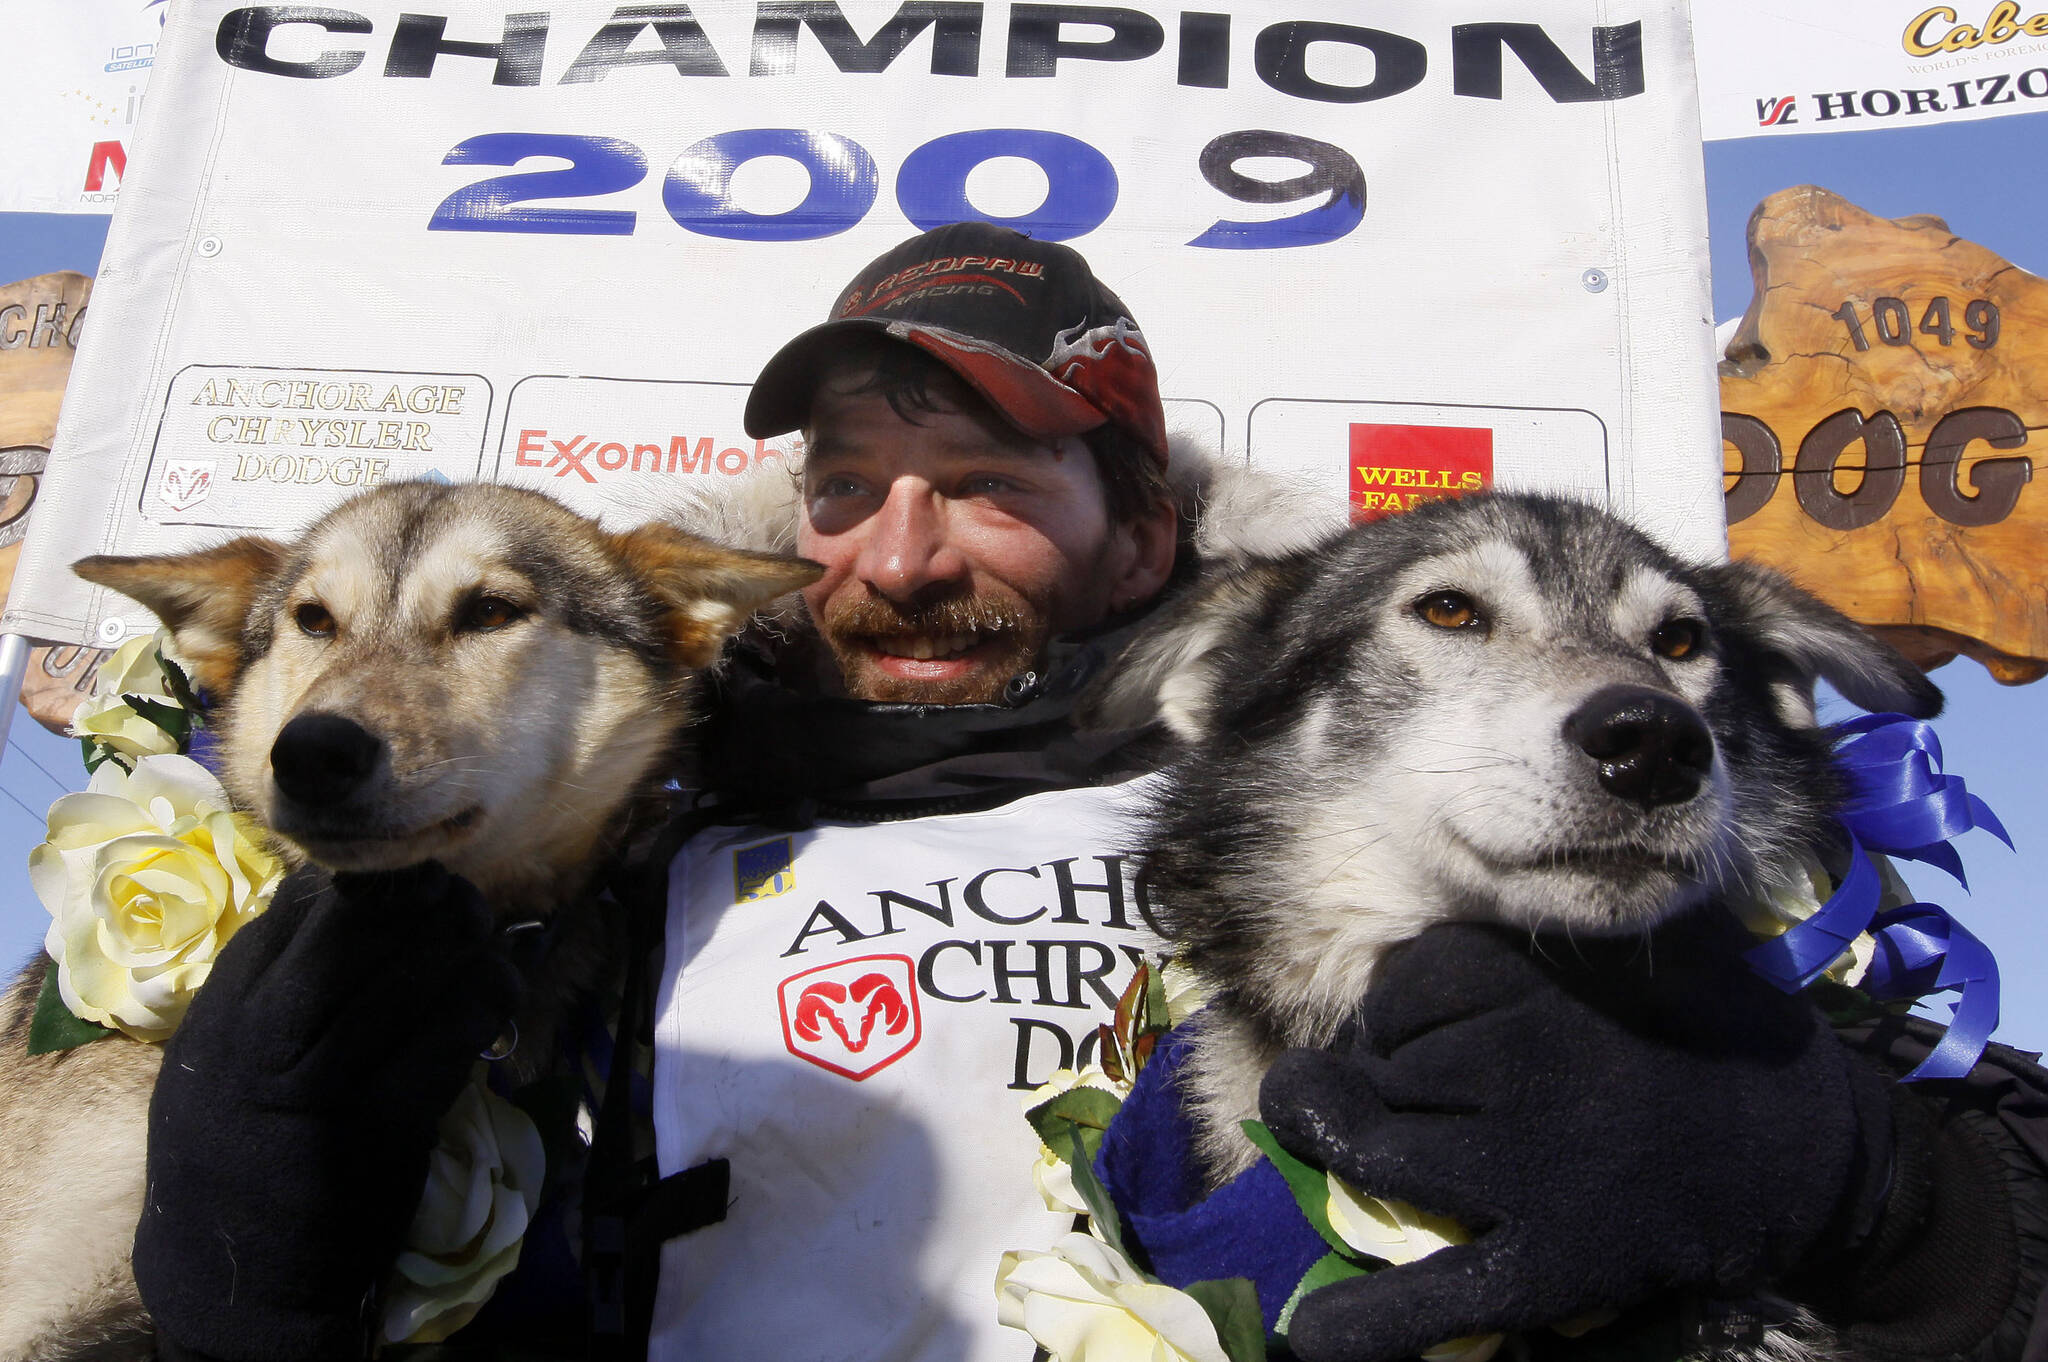 FILE - Lance Mackey sits with his lead dogs Larry, right, and Maple after crossing the finish line of the Iditarod Trail Sled Dog Race on March 18, 2009, in Nome, Alaska, to win his third Iditarod in a row. Mackey, a four-time Iditarod Trail Sled Dog Race winner and one of mushing’s most colorful and accomplished champions who also suffered from health and drug issues, died Wednesday, Sept. 7, 2022, his father and kennel announced on Facebook. He was 52. (AP Photo/Al Grillo, File)